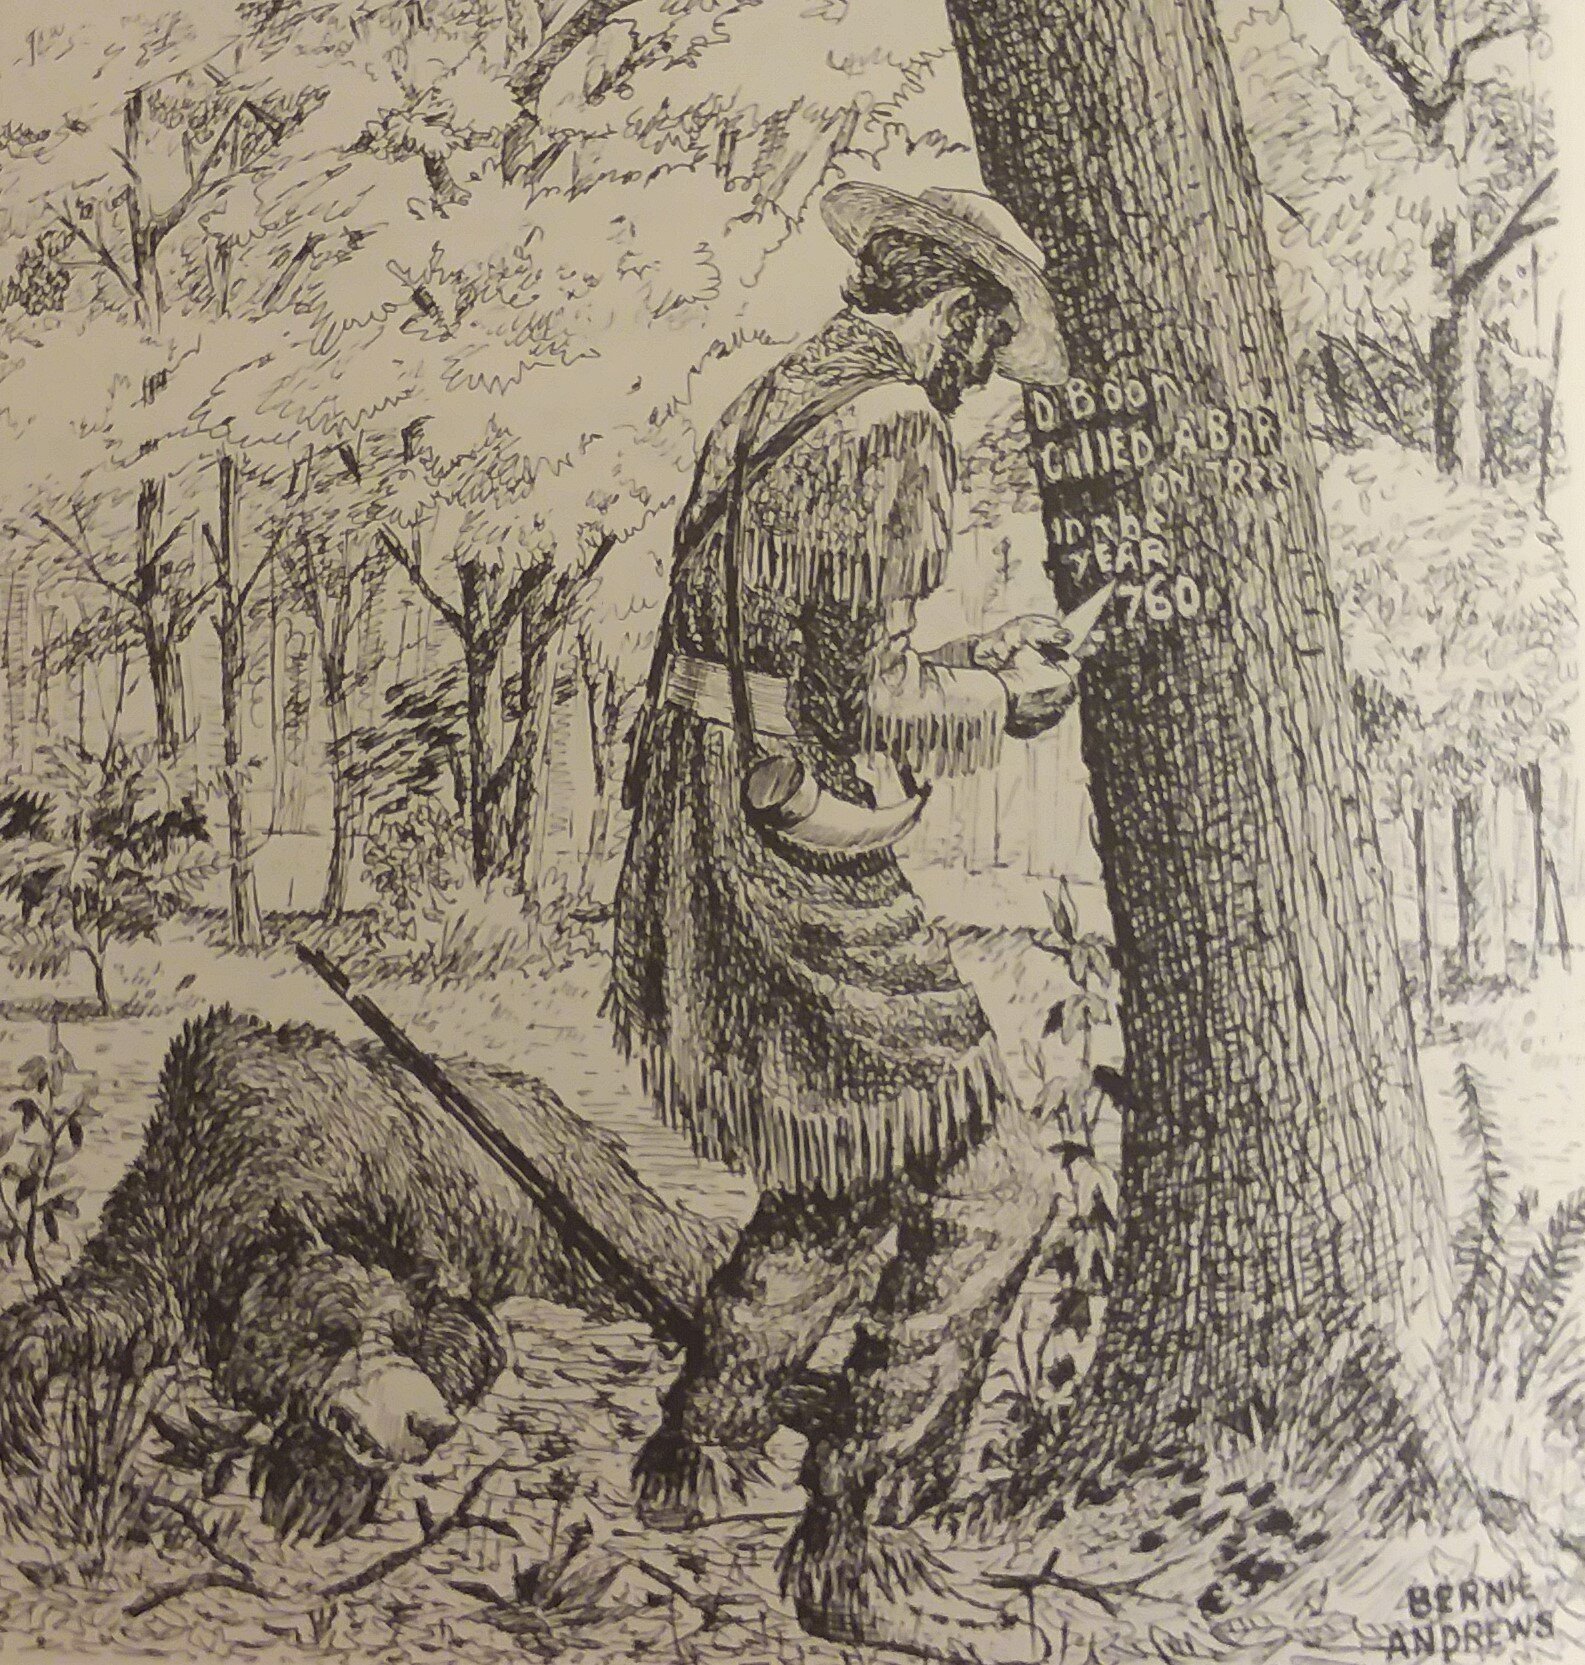 D. Boon cillED A Bar on tree in the Year 1760Artist: Bernie AndrewsSource: Alderman, Pat. The Overmountain Men. Johnson City: The Overmountain Press, 1986.